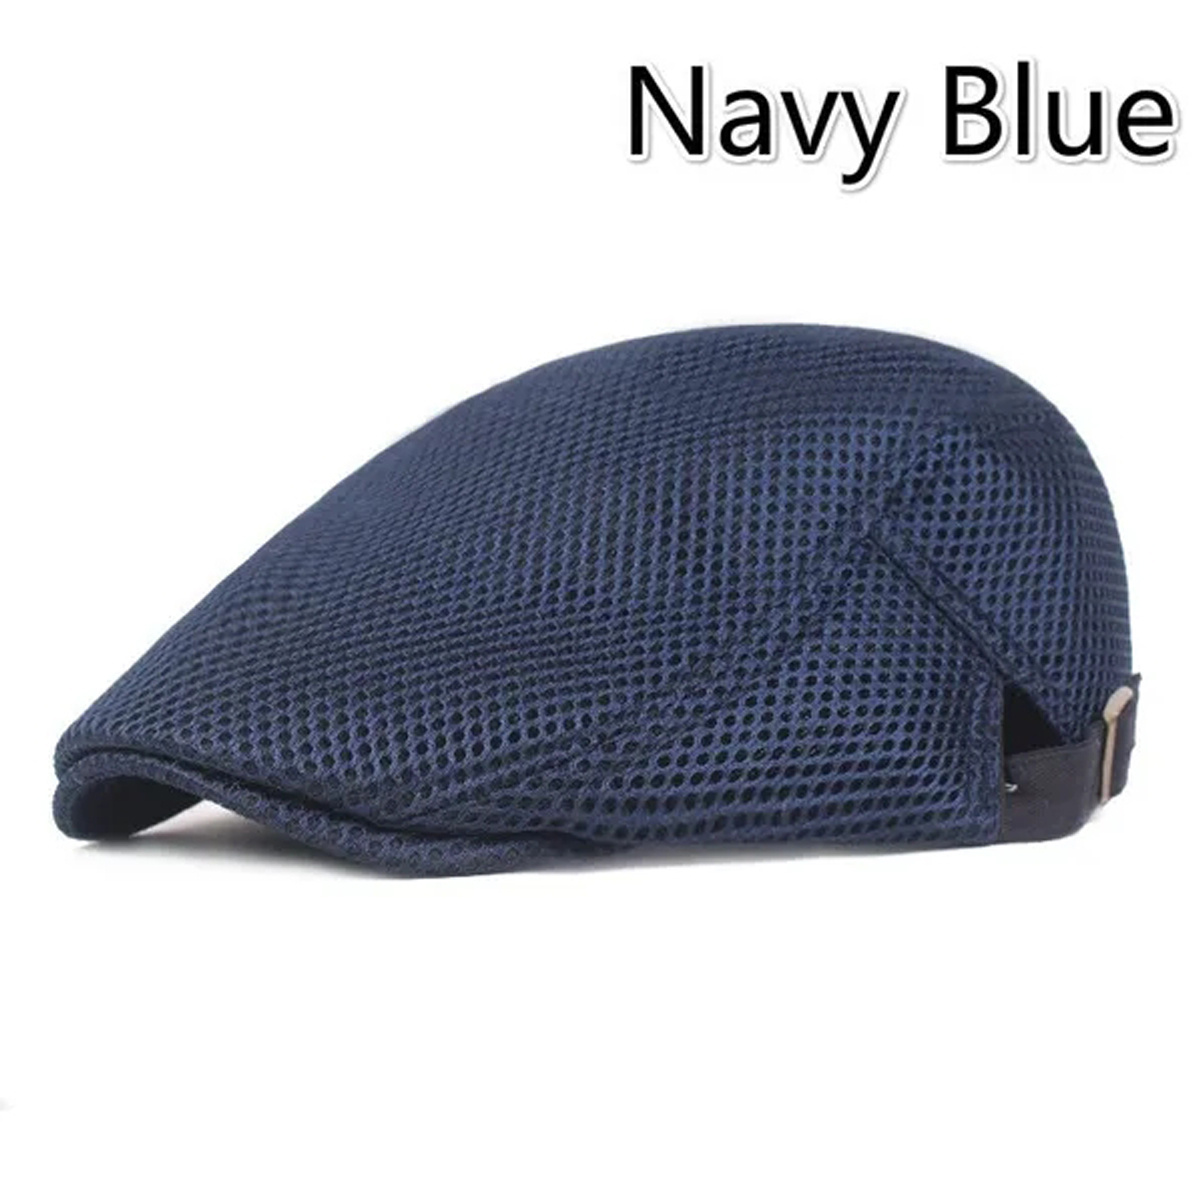 1pc 8 colors men cabbie flat cap breathable mesh summer hat adjustable newsboy beret ivy cap ideal choice for gifts